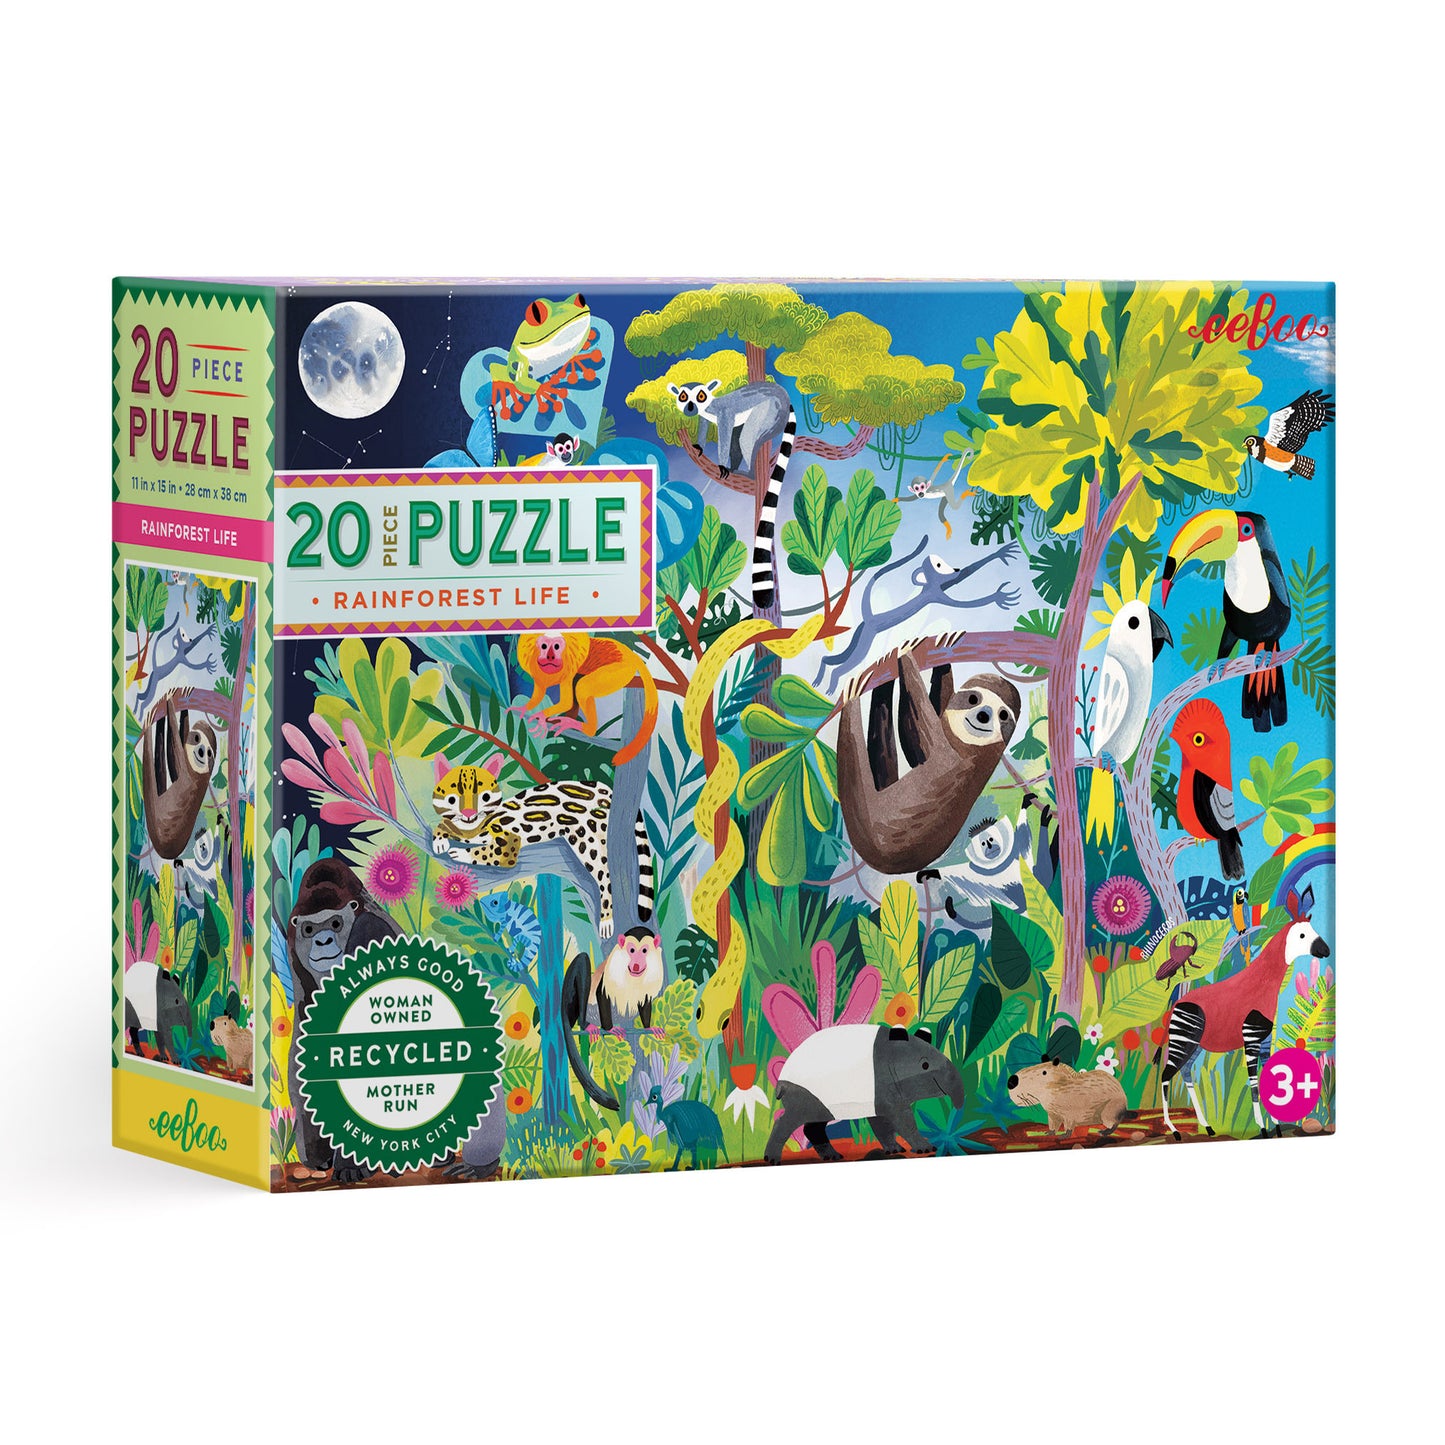 Rainforest Animal Life 20 Piece Jigsaw Puzzle | eeBoo | Makes a Great Gift for Pre-School Kids 3+